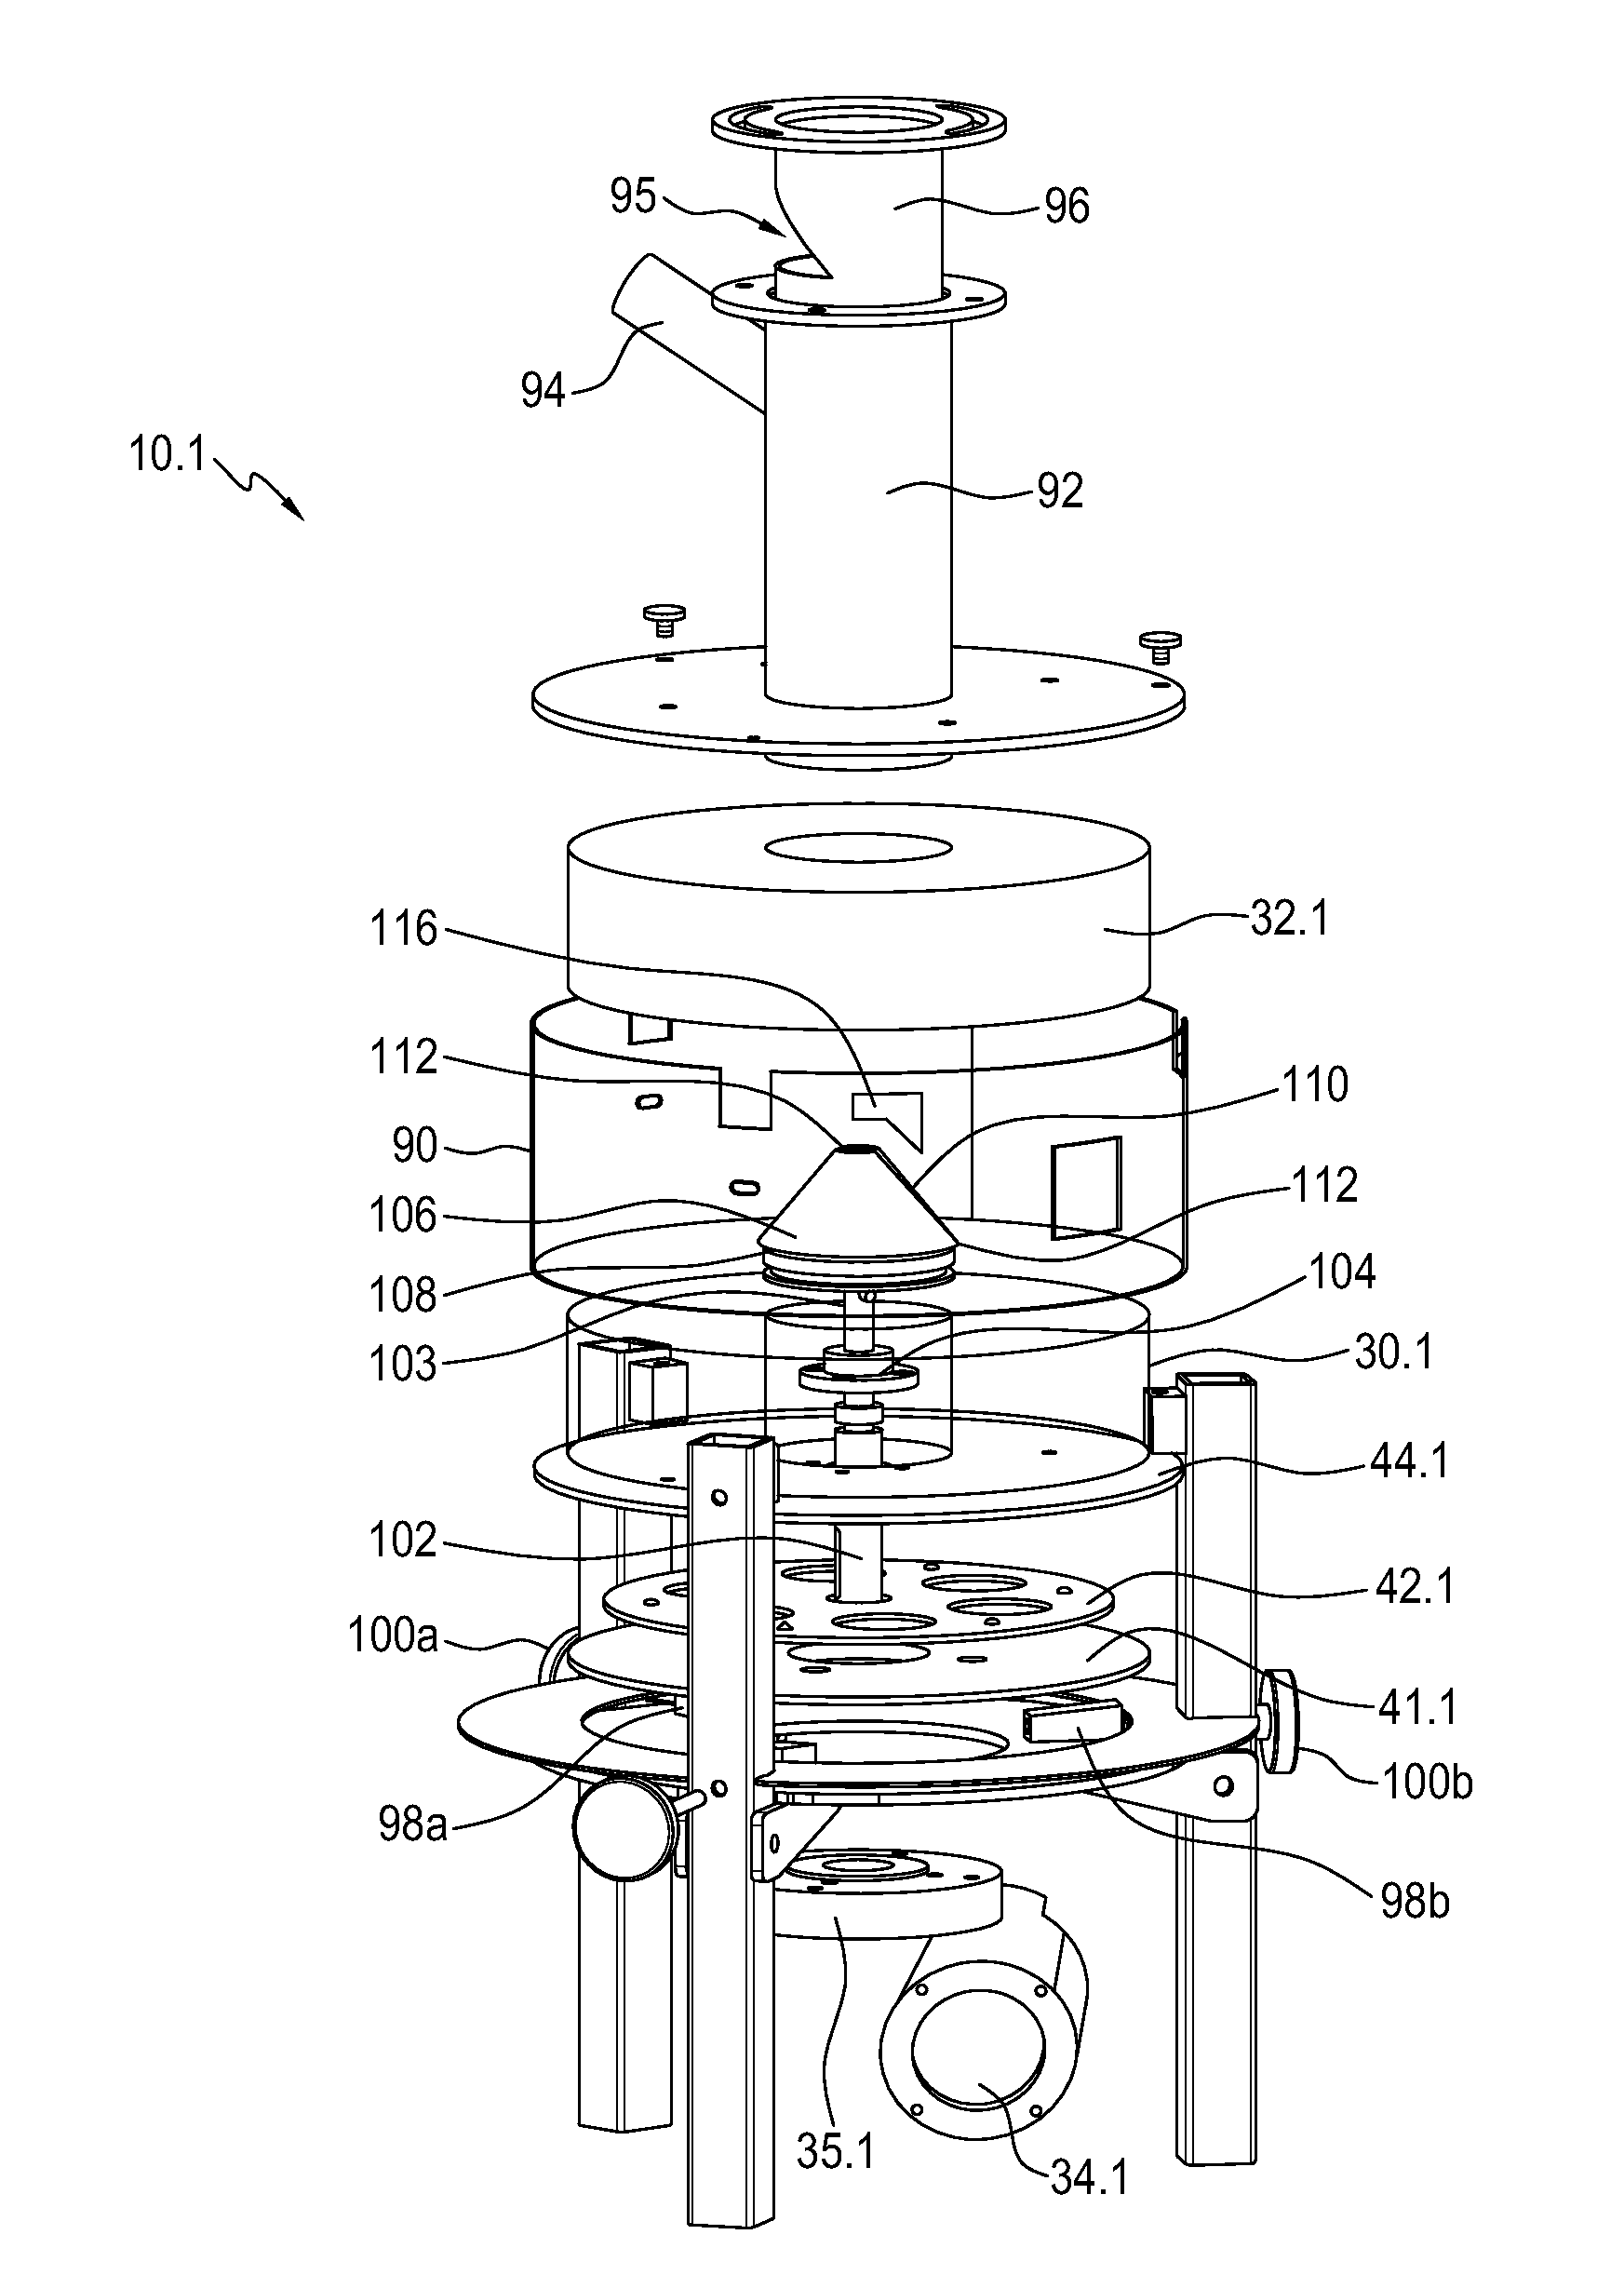 Automatic and continuous rubber extracting device for extracting rubber from a rubber-bearing plant material